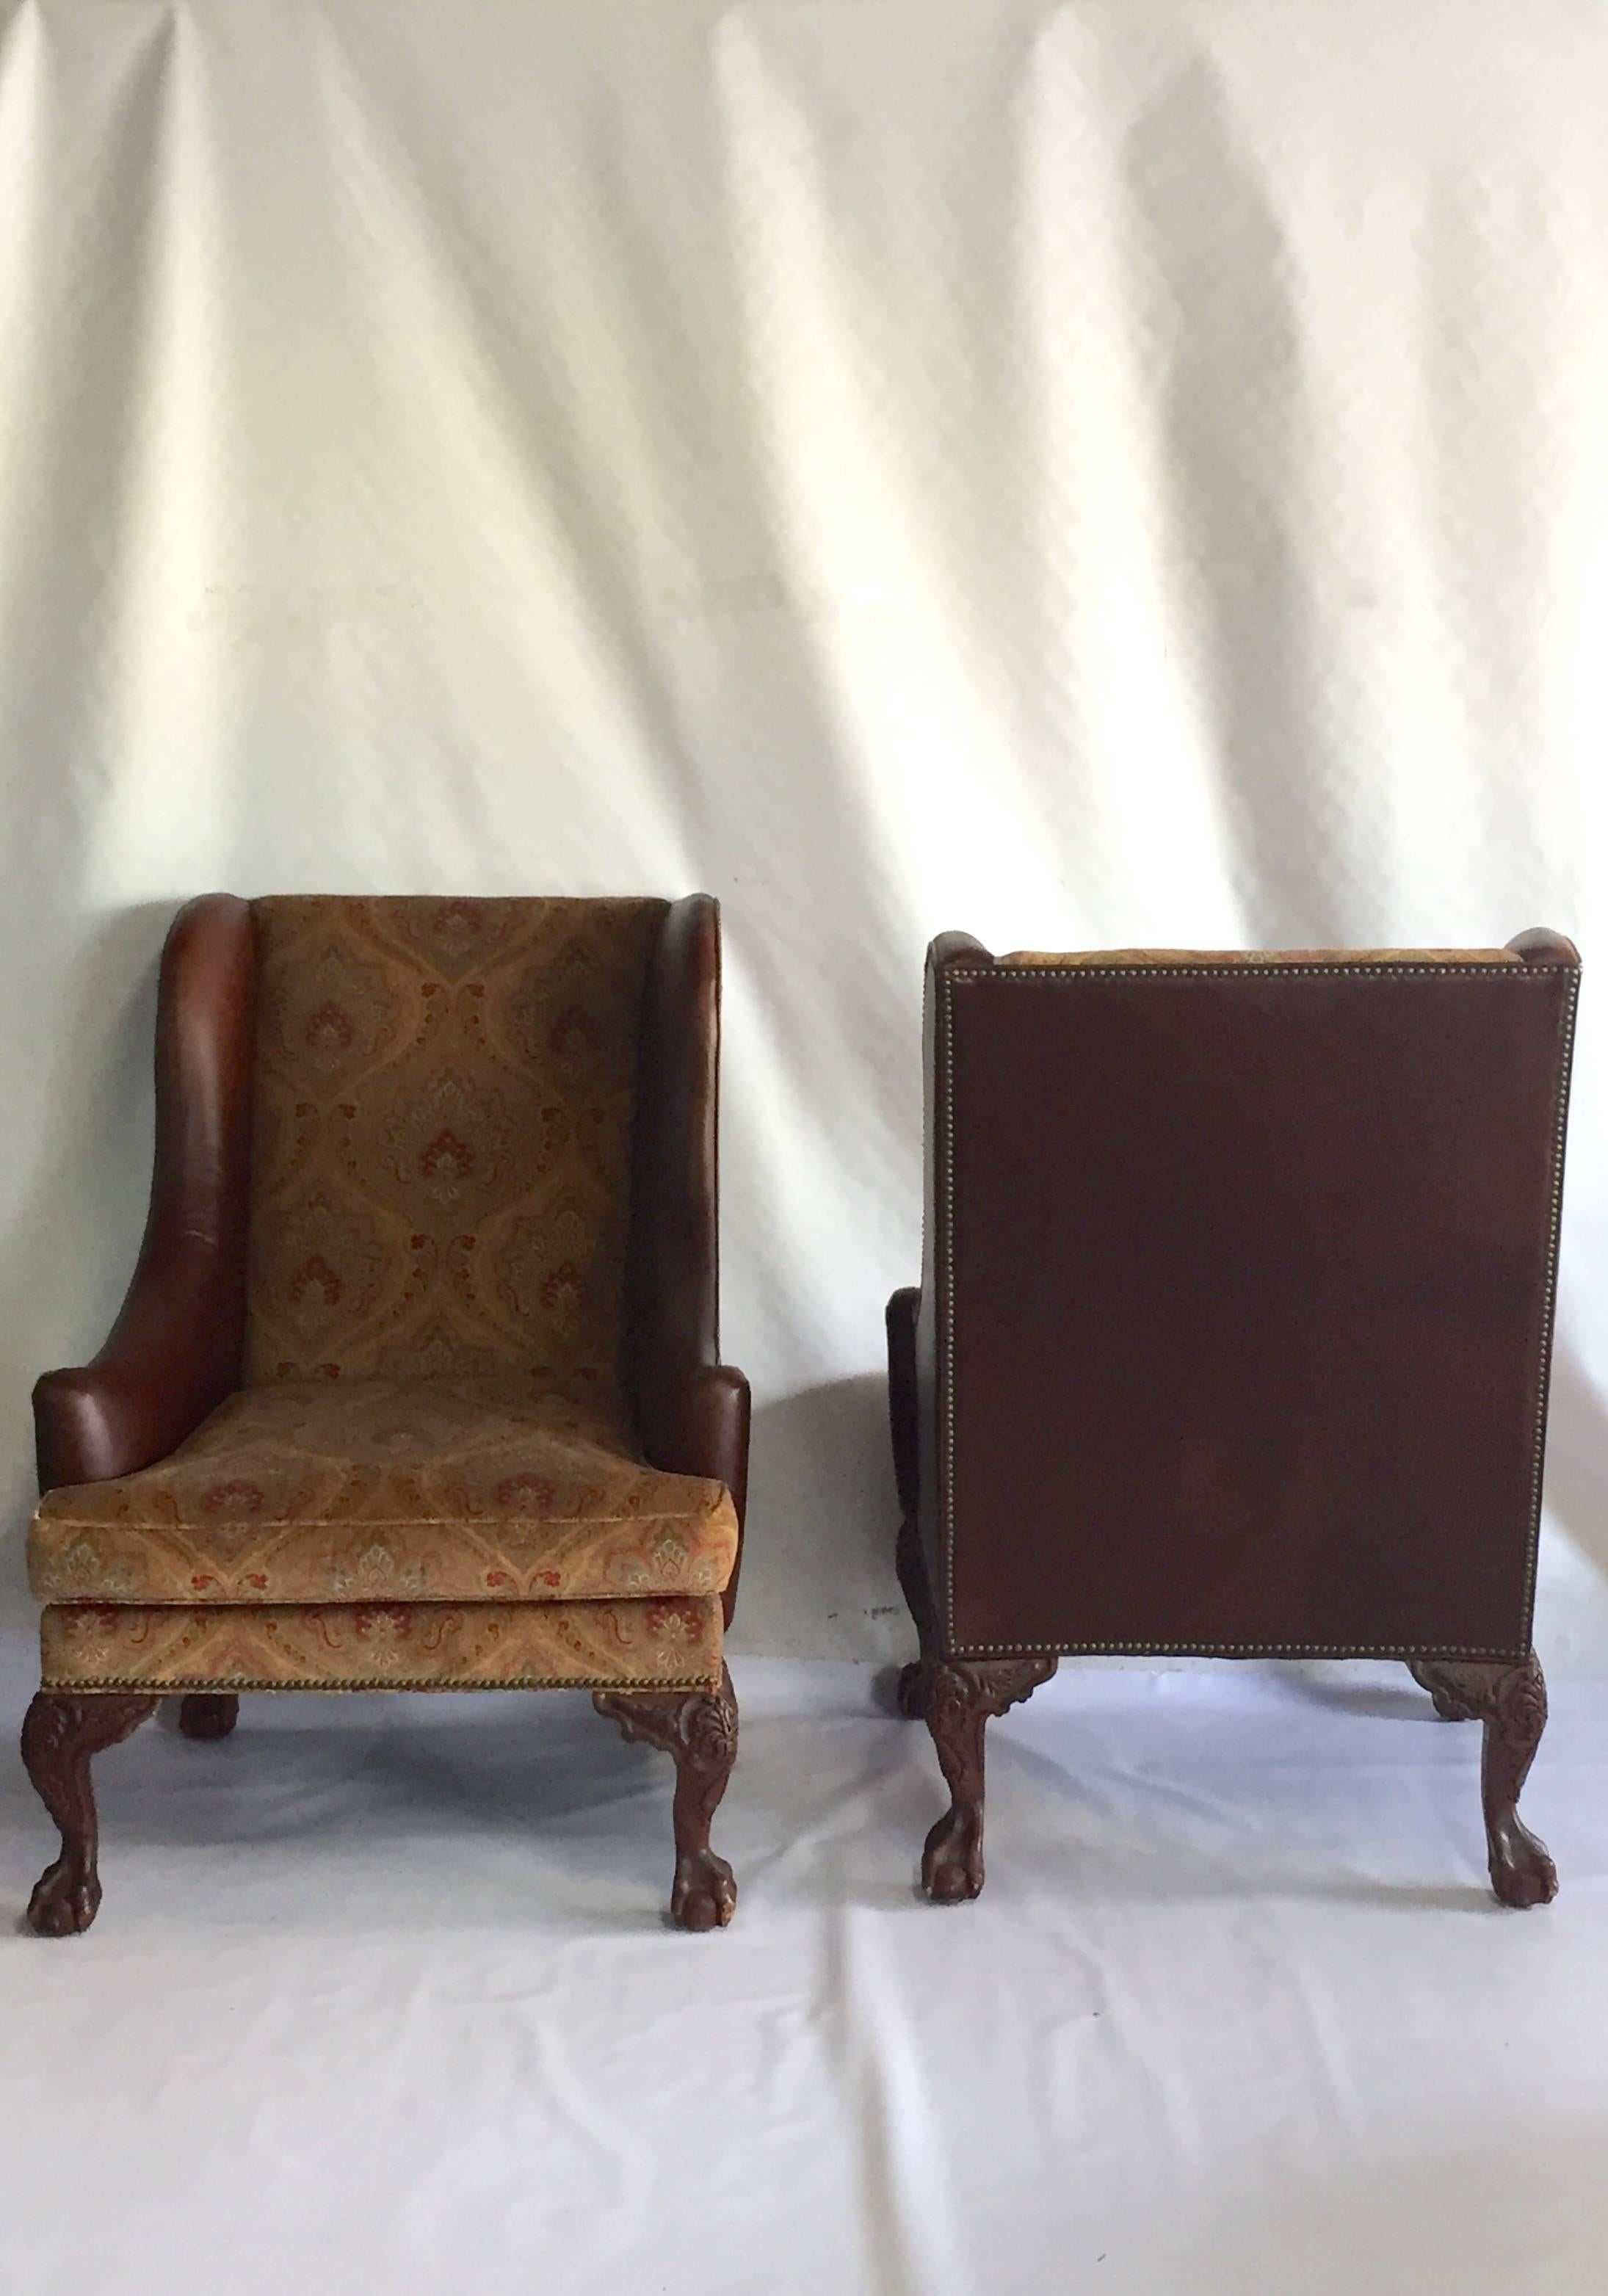 1980s leather and fabric upholstered George II style high back wing chairs and ottoman three-piece set. Four hand-carved cabriole claw foot legs, brass nailhead detail with chocolate leather and a velvet blend paisley patterned fabric. Seat cushions